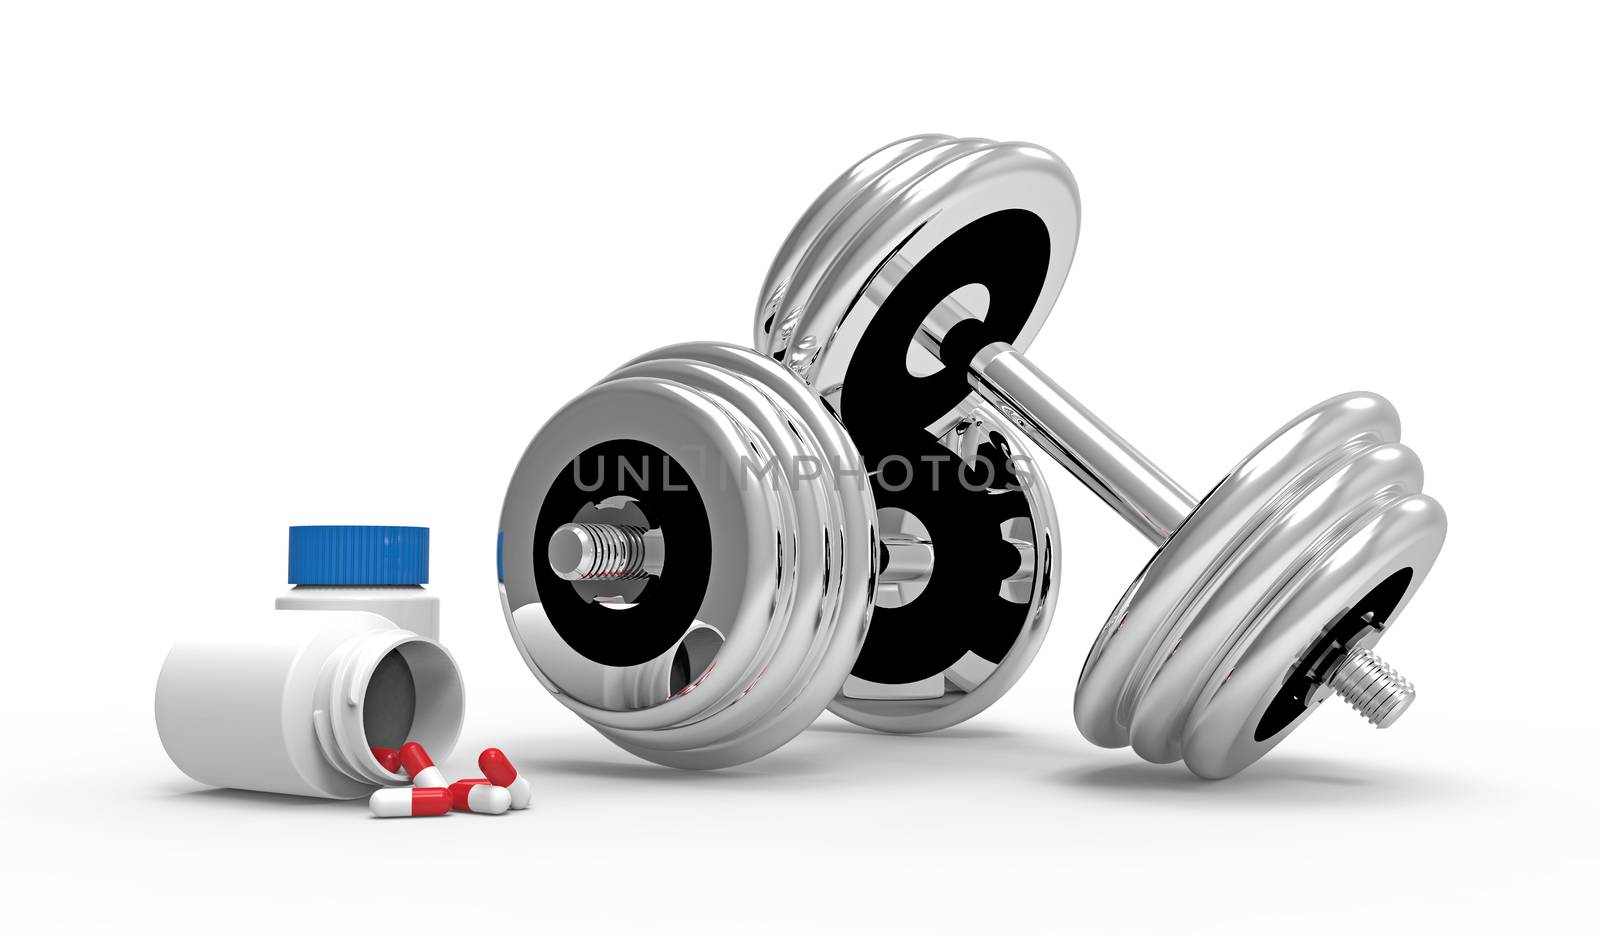 Two dumbbells with vial of pills, on white background, 3D render